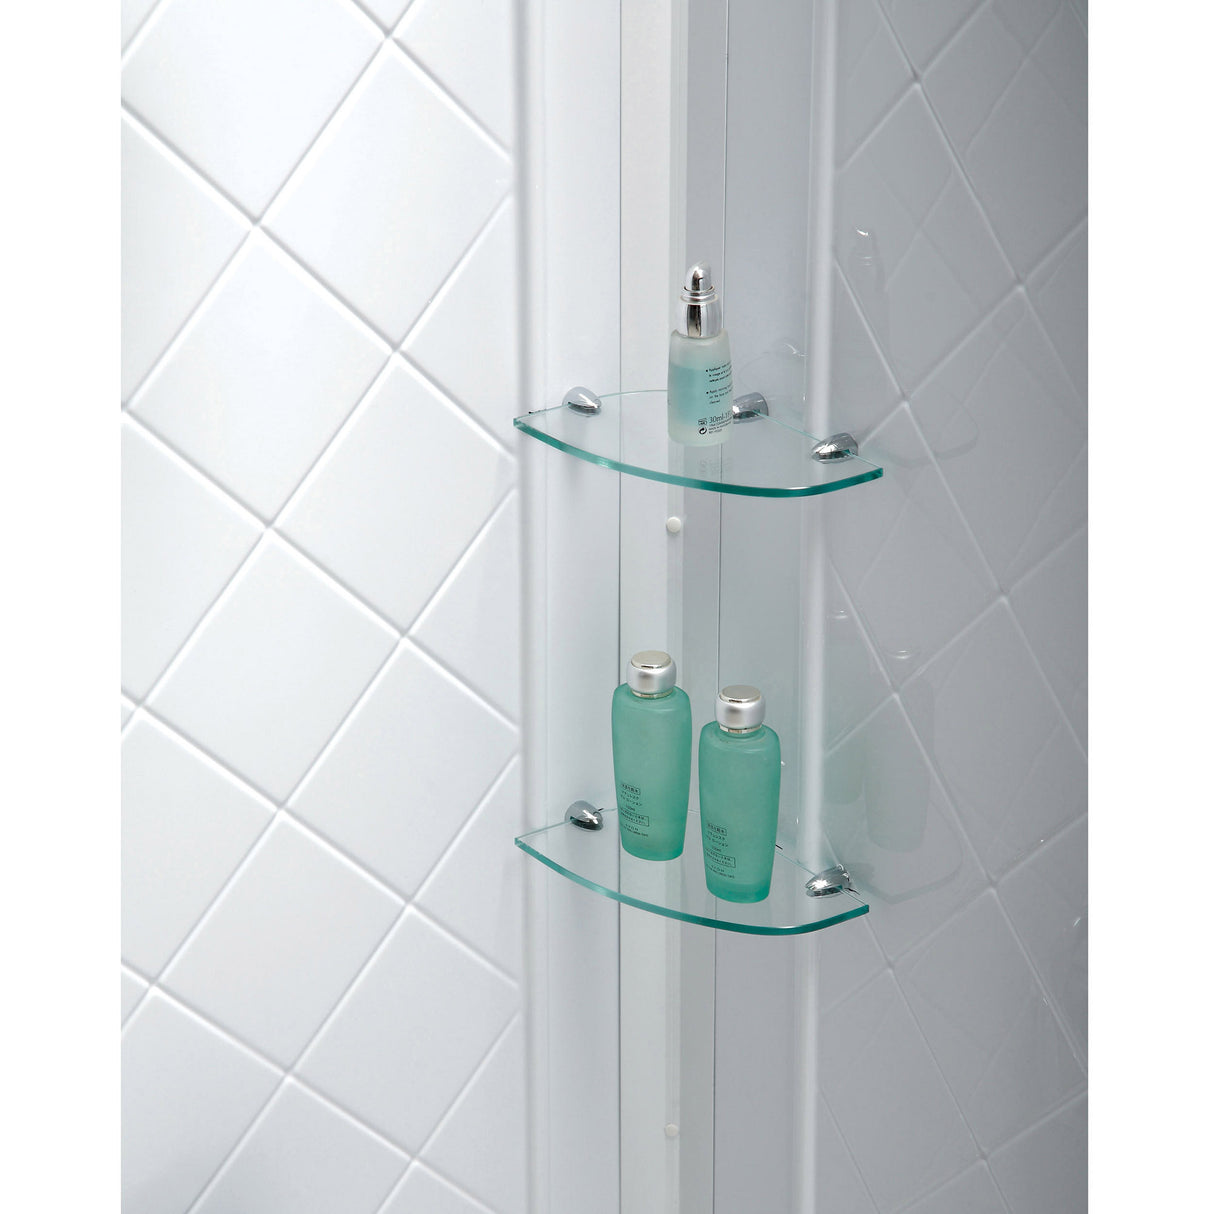 DreamLine Infinity-Z 36 in. D x 48 in. W x 76 3/4 in. H Clear Sliding Shower Door in Chrome, Center Drain Base and Wall Kit